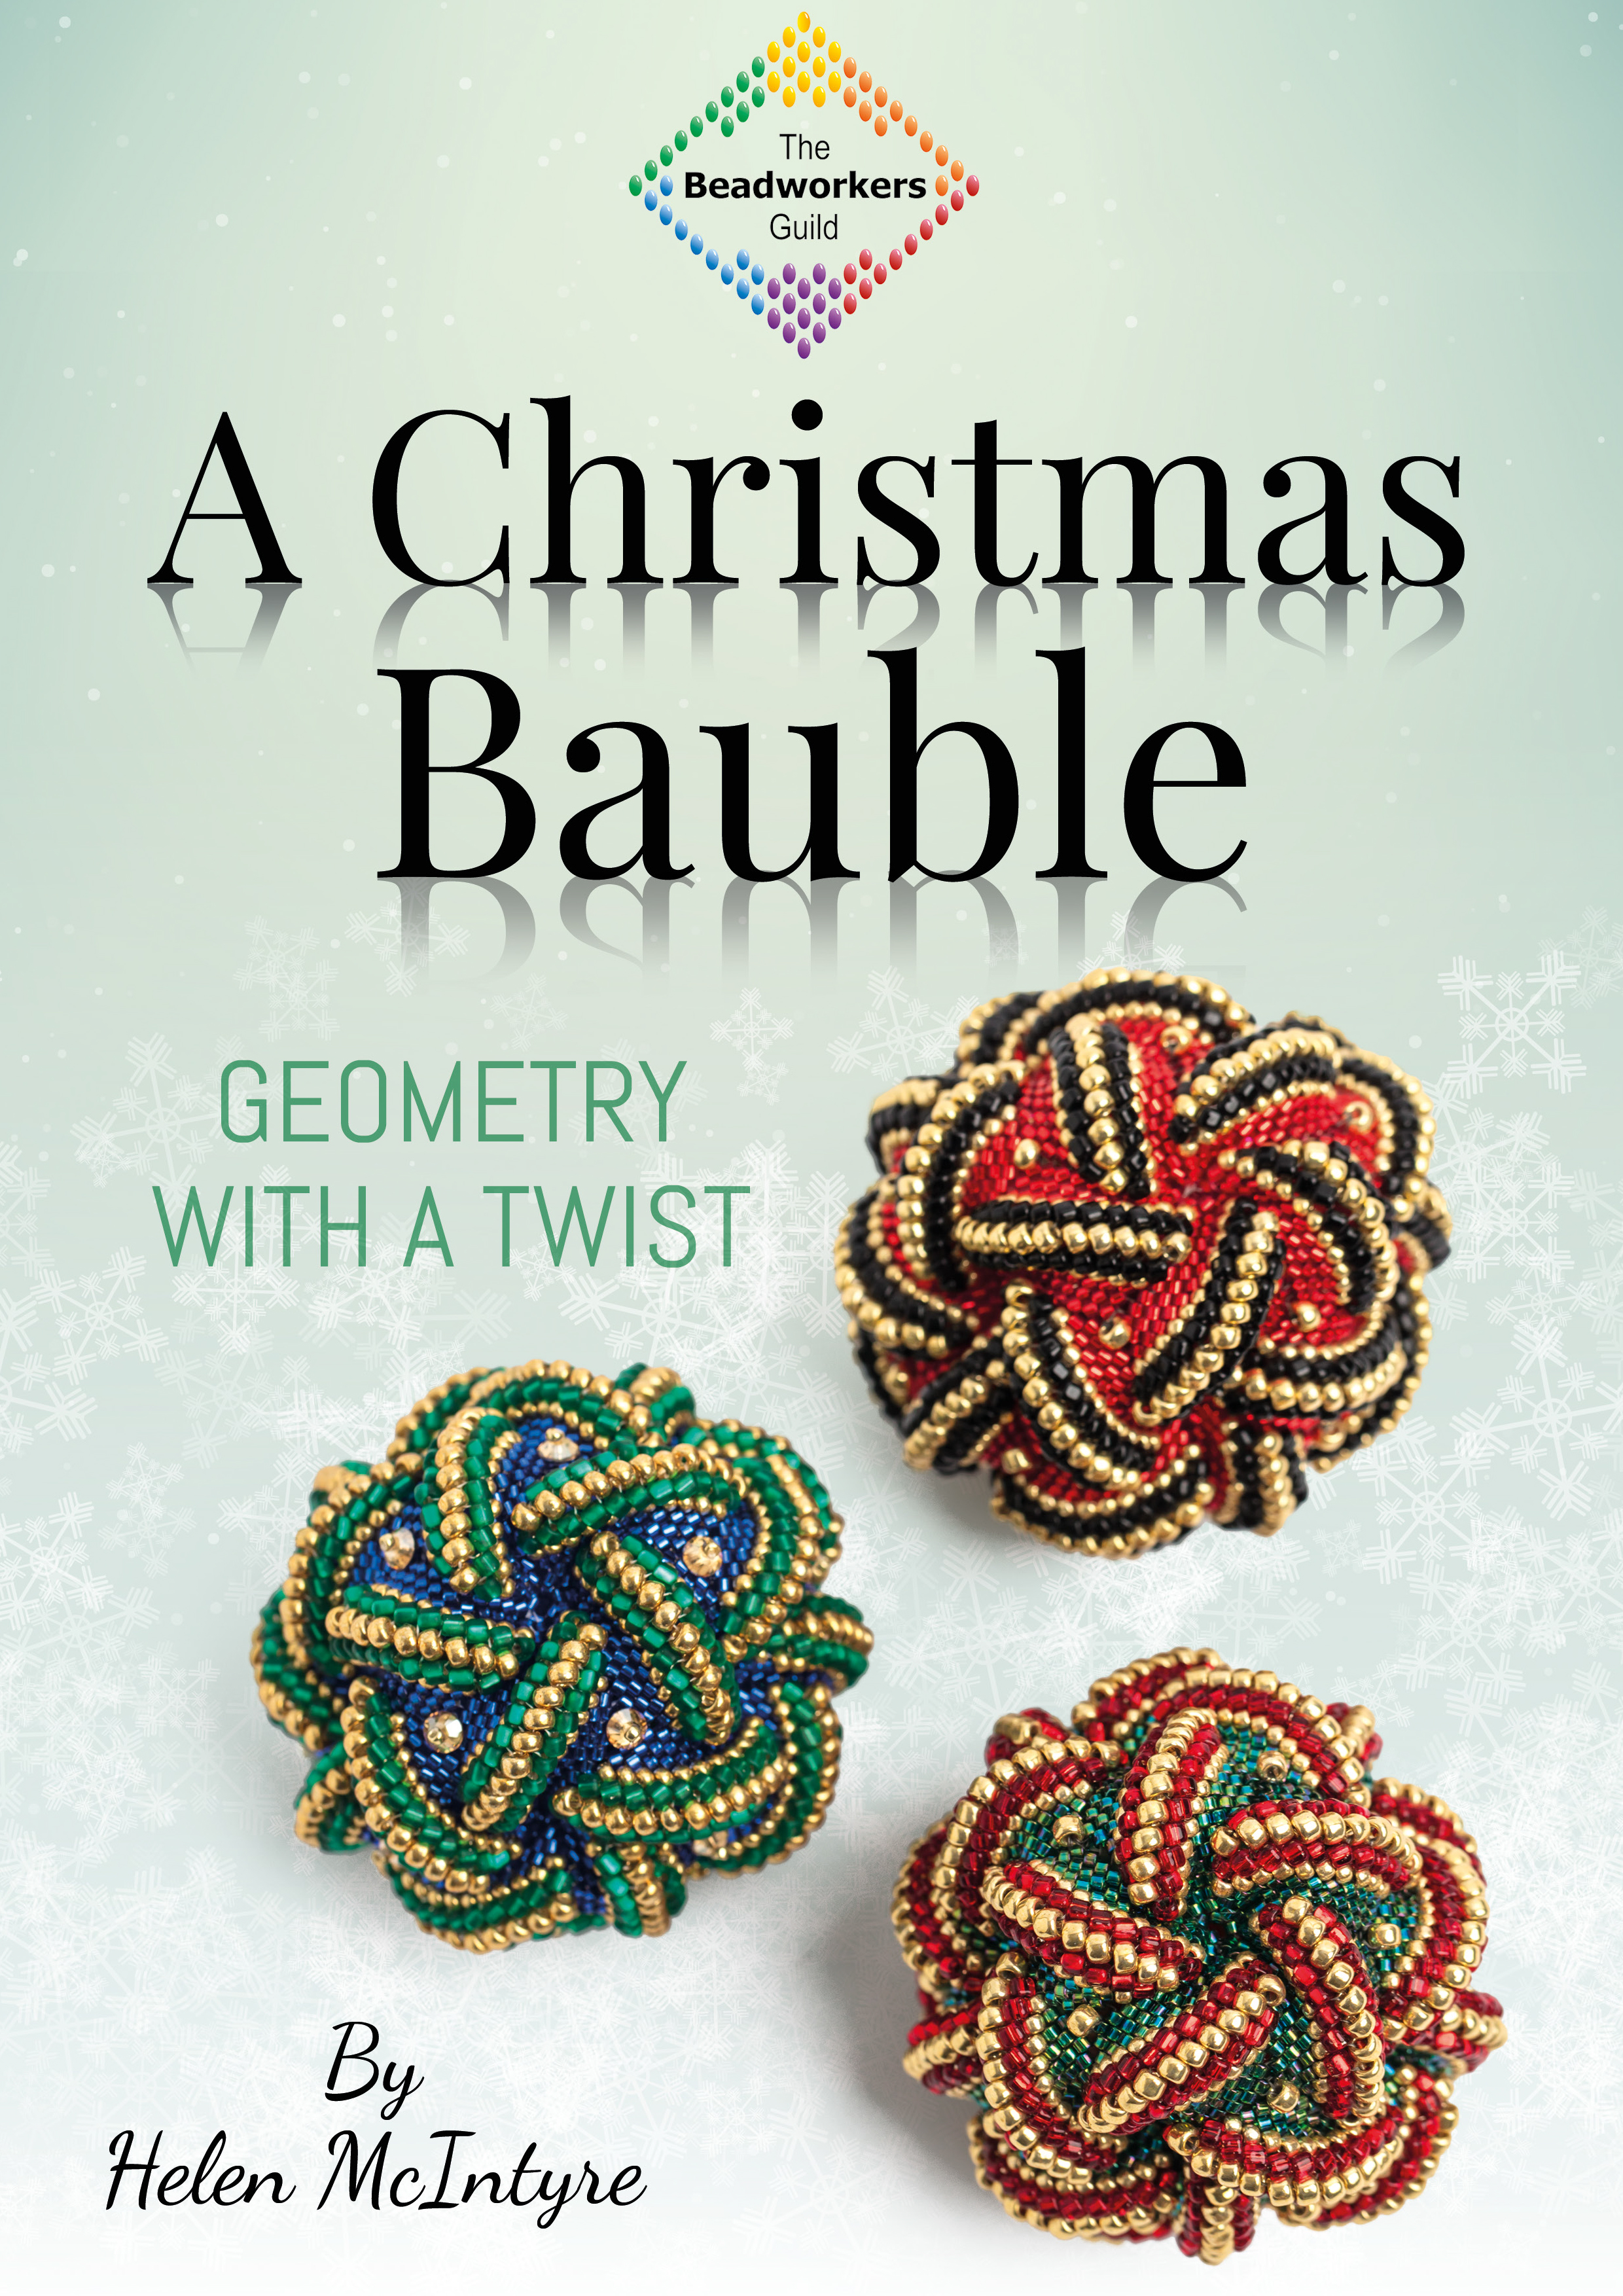 Image of A Christmas Bauble - Geometry with a twist